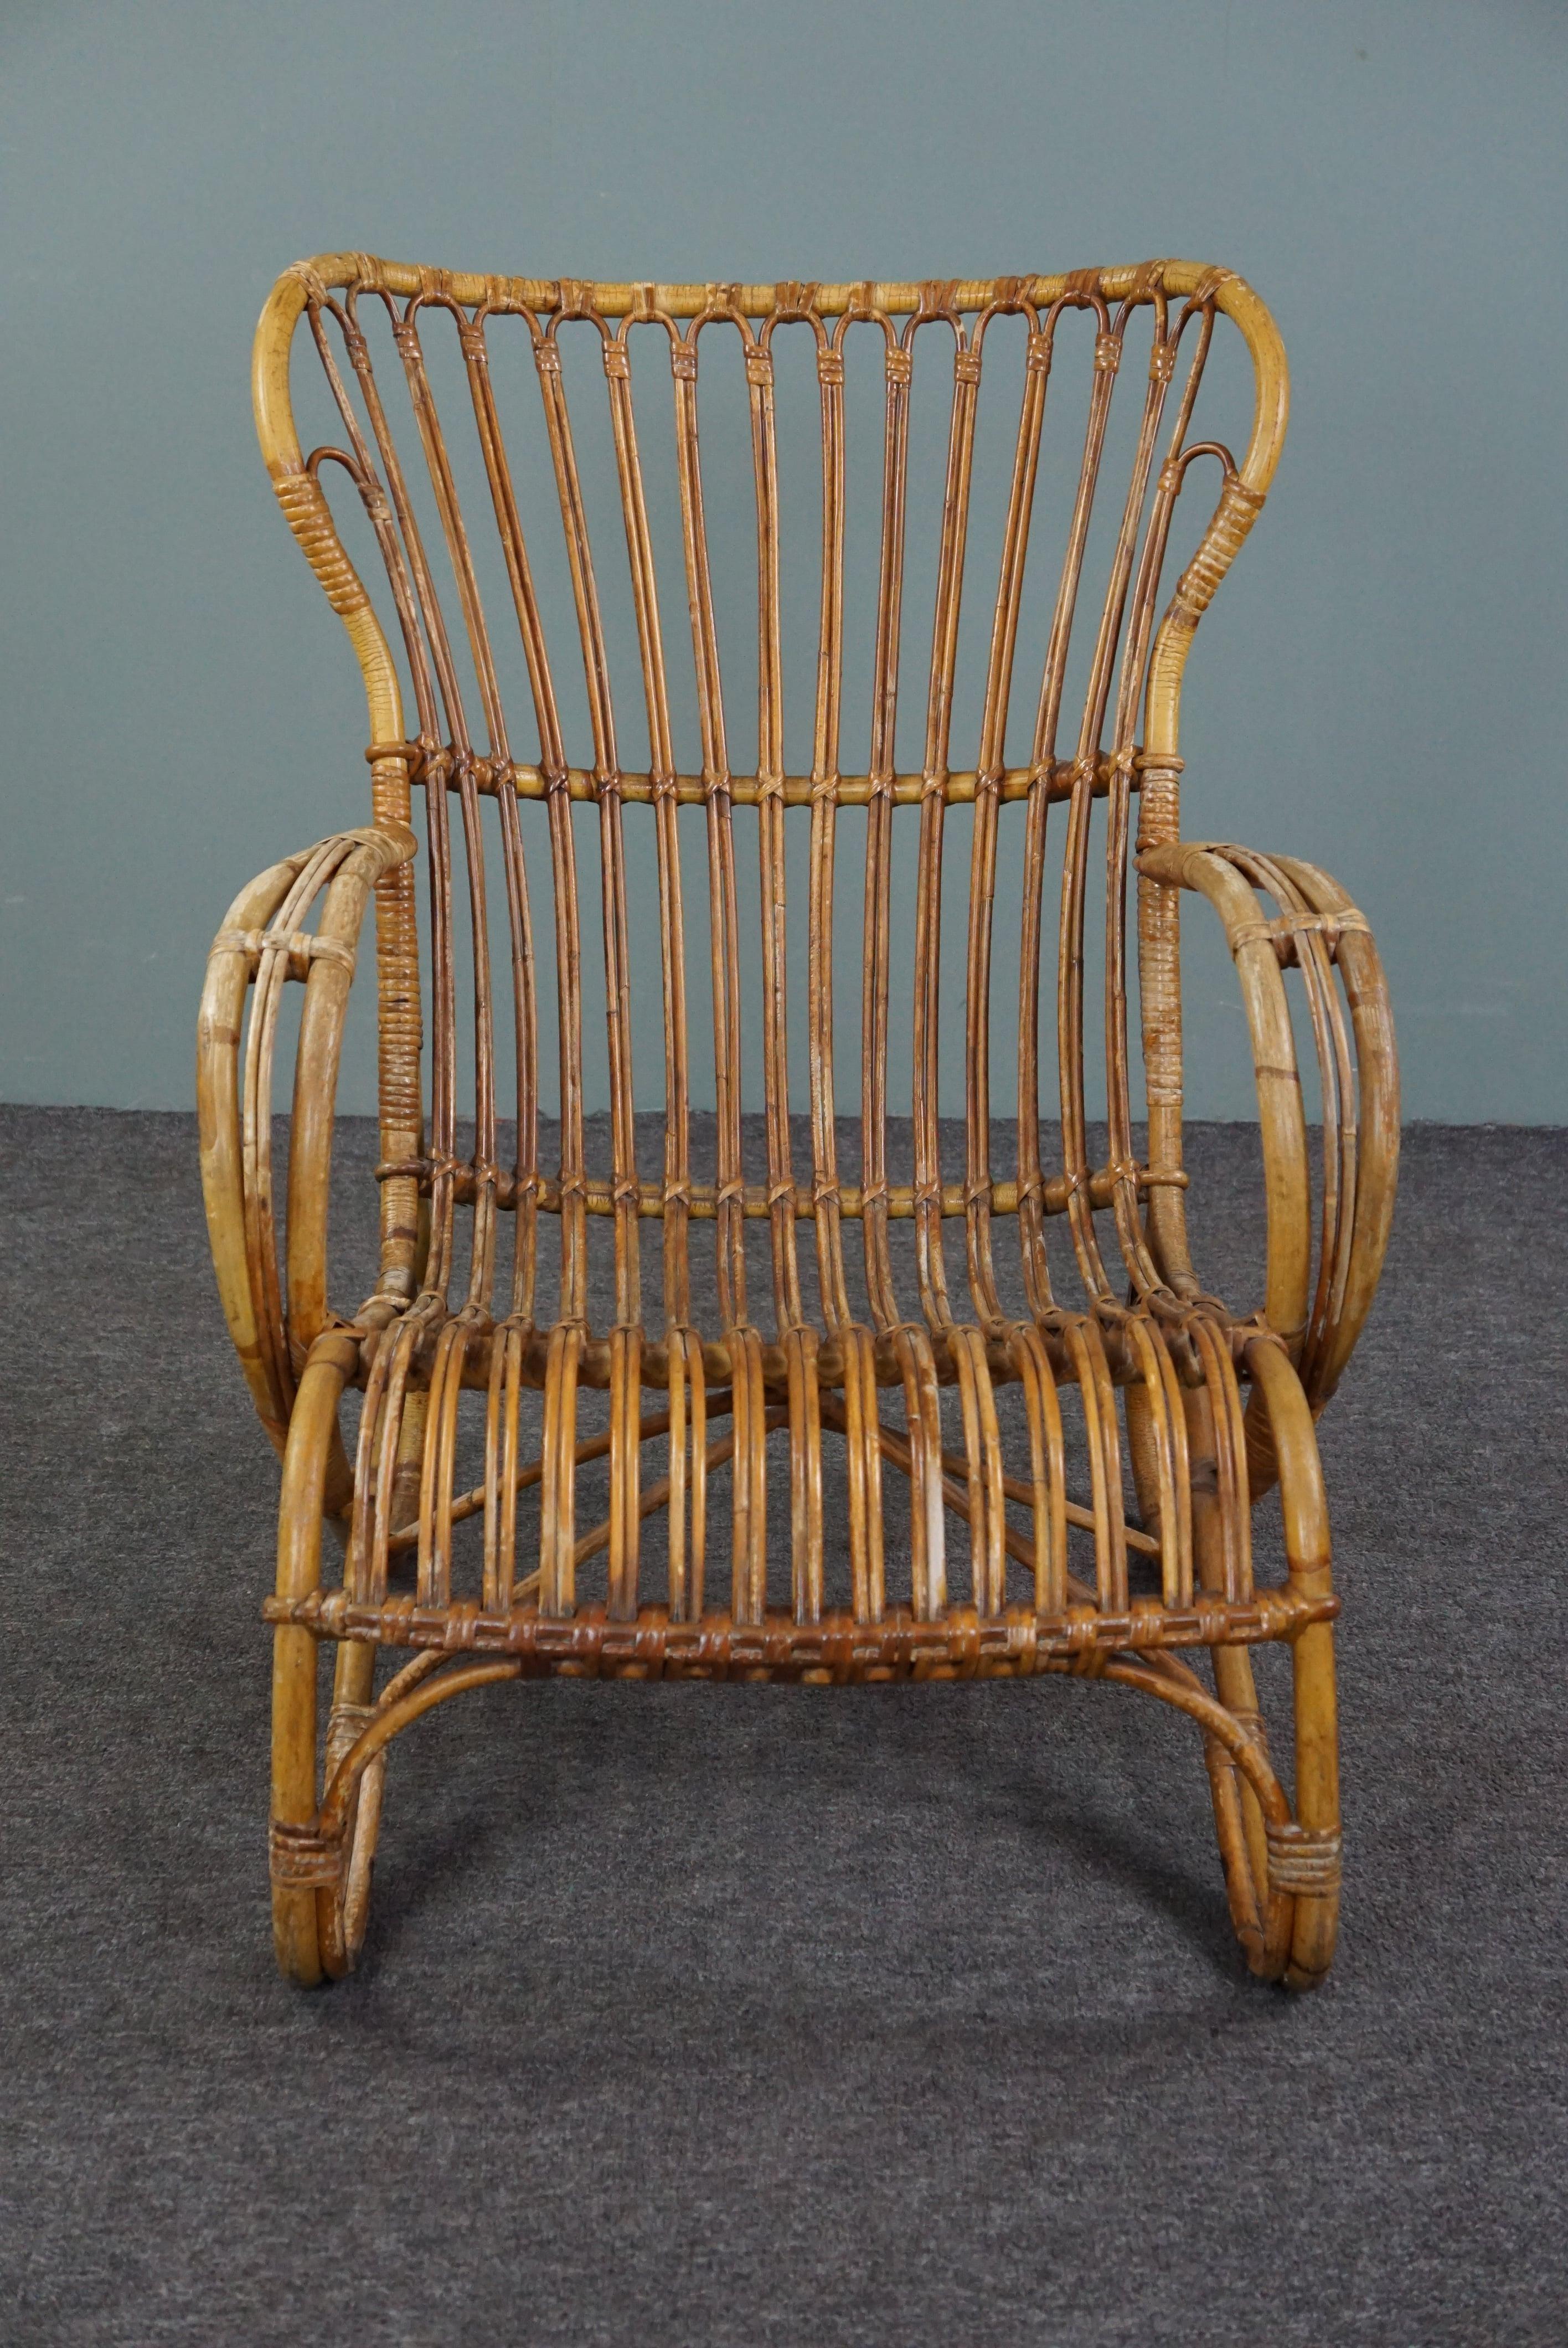 Offered is this very beautifully designed rattan Belse 8 armchair made in the 1950s in the Netherlands.

This very charming warm-colored rattan armchair has a beautiful subtle design and beautiful round details in the backrest. The seat of this